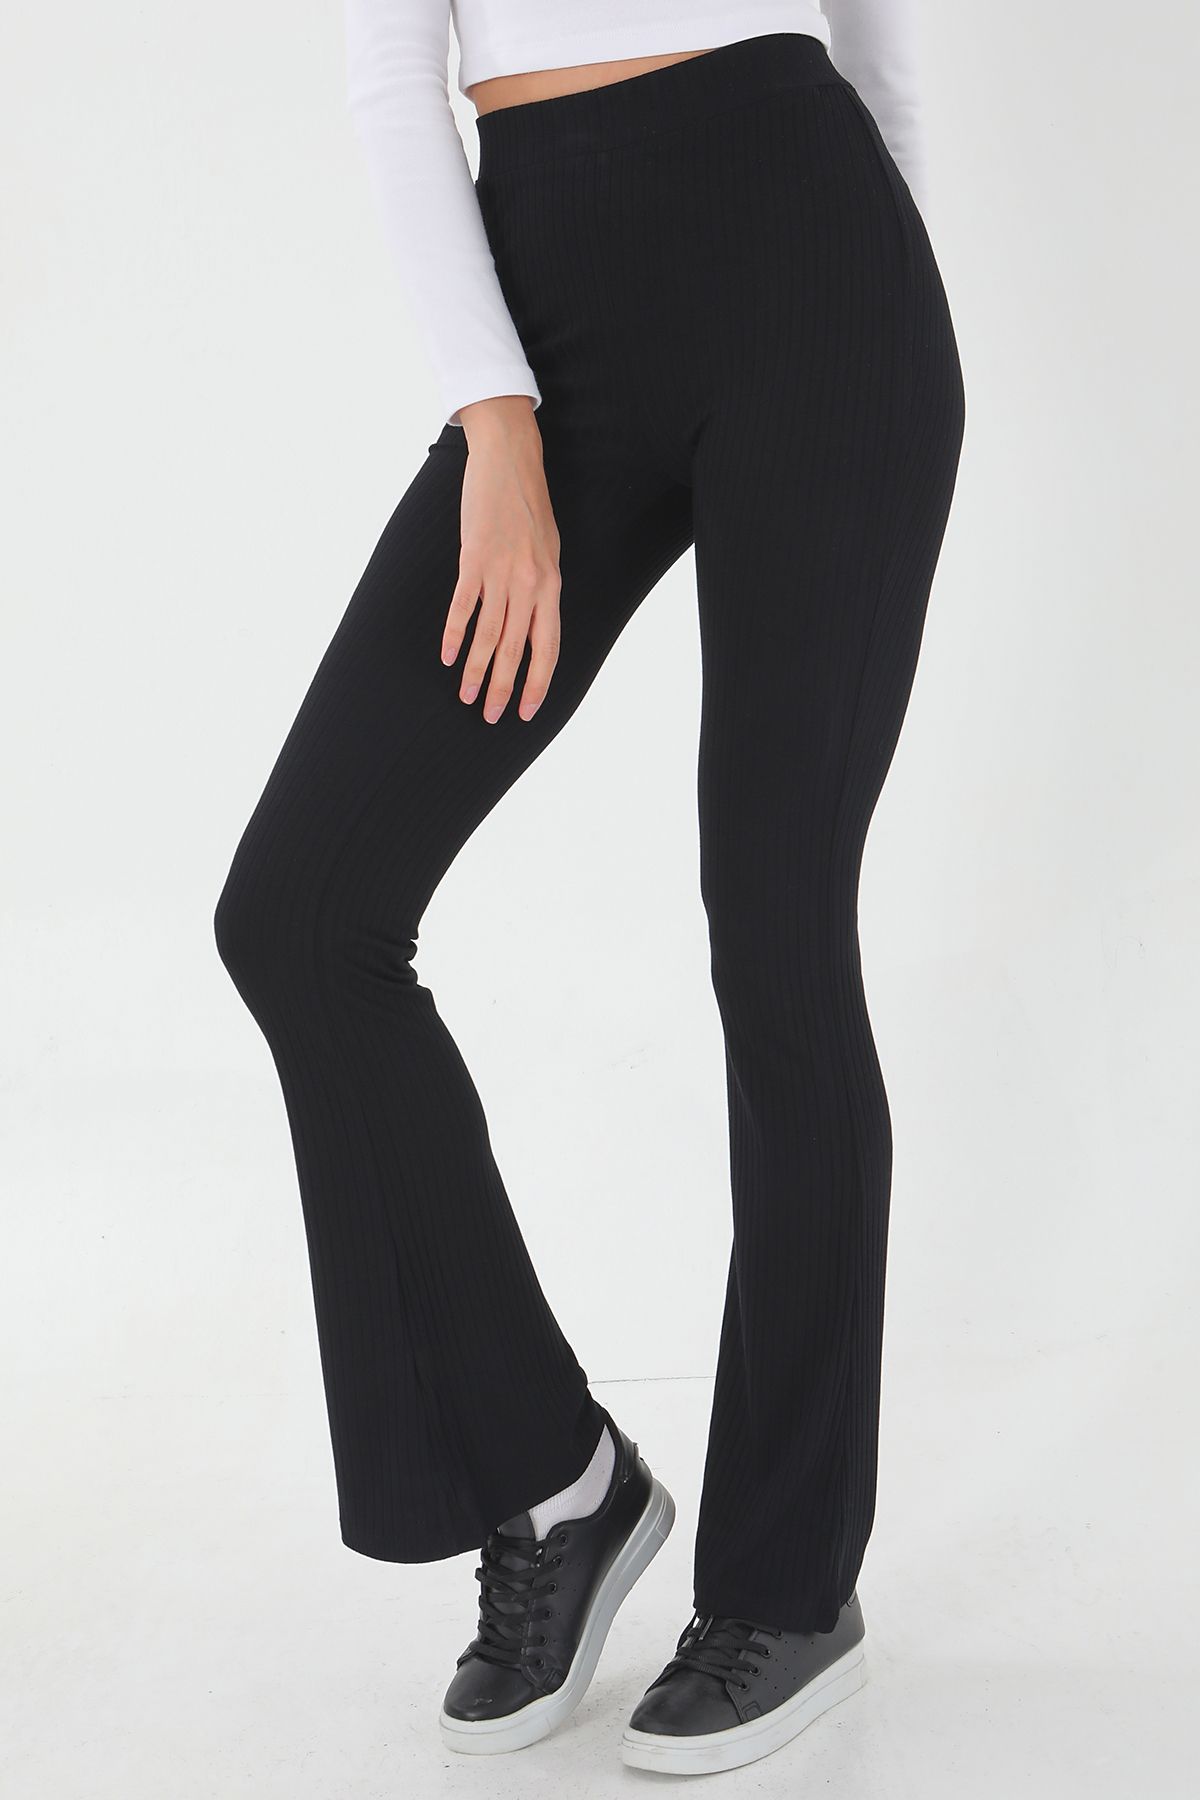 ESPİNA Ribbed Report 2 Pack Flare / Flare Leg High Waist Stretchy Knitted  Leggings Trousers - Trendyol